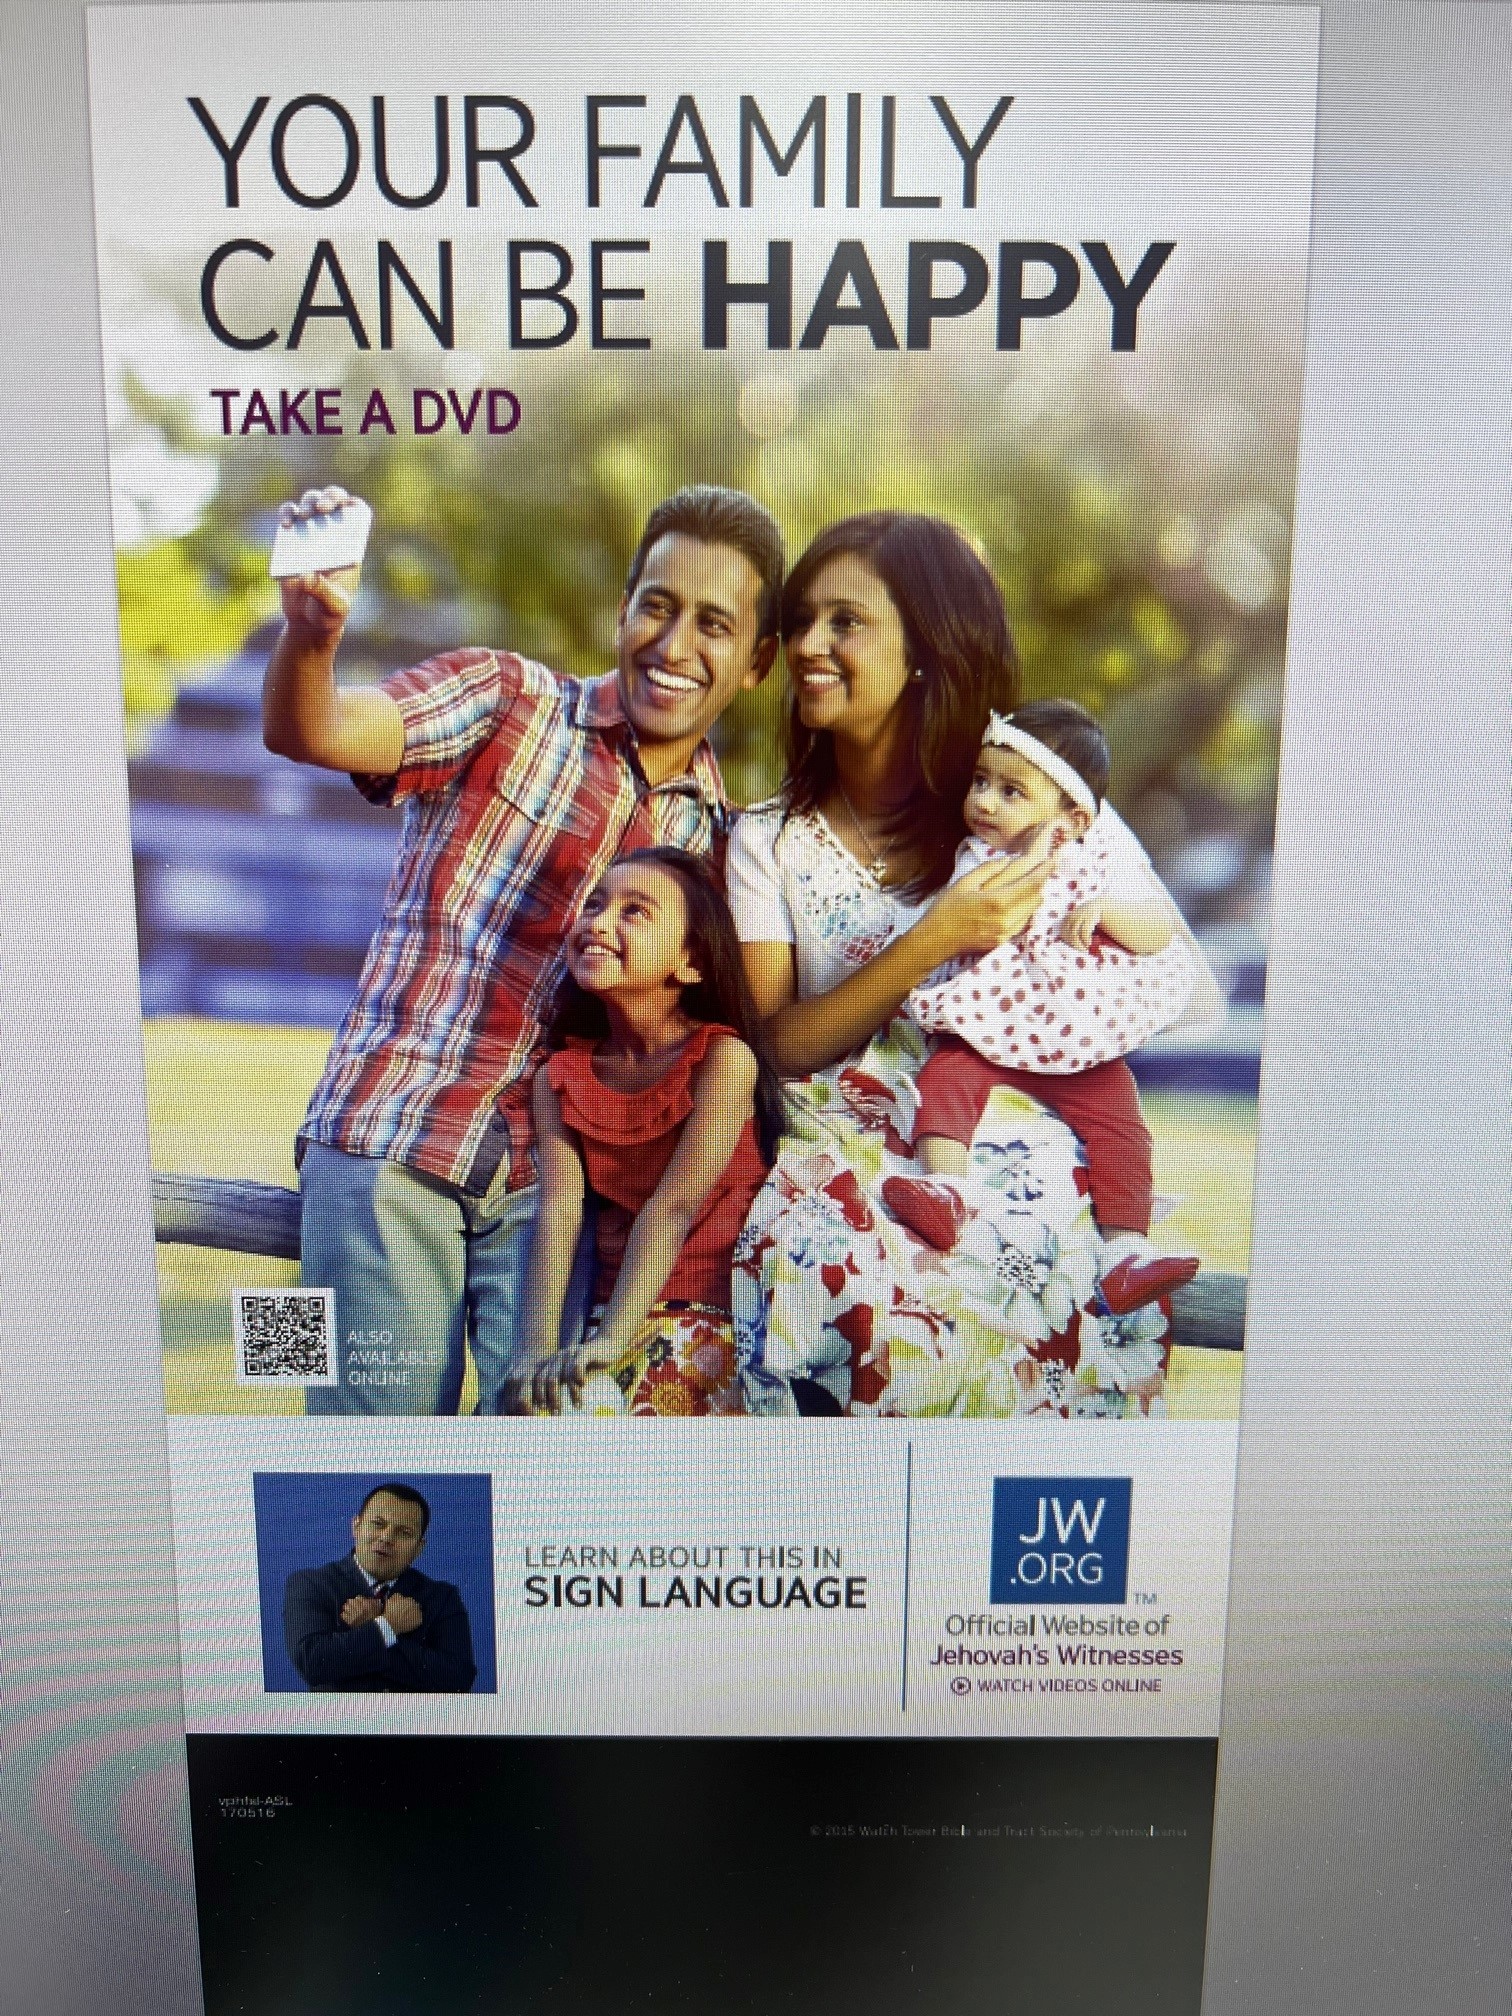 Specifically for ASL- "Your Family Can Be Happy"